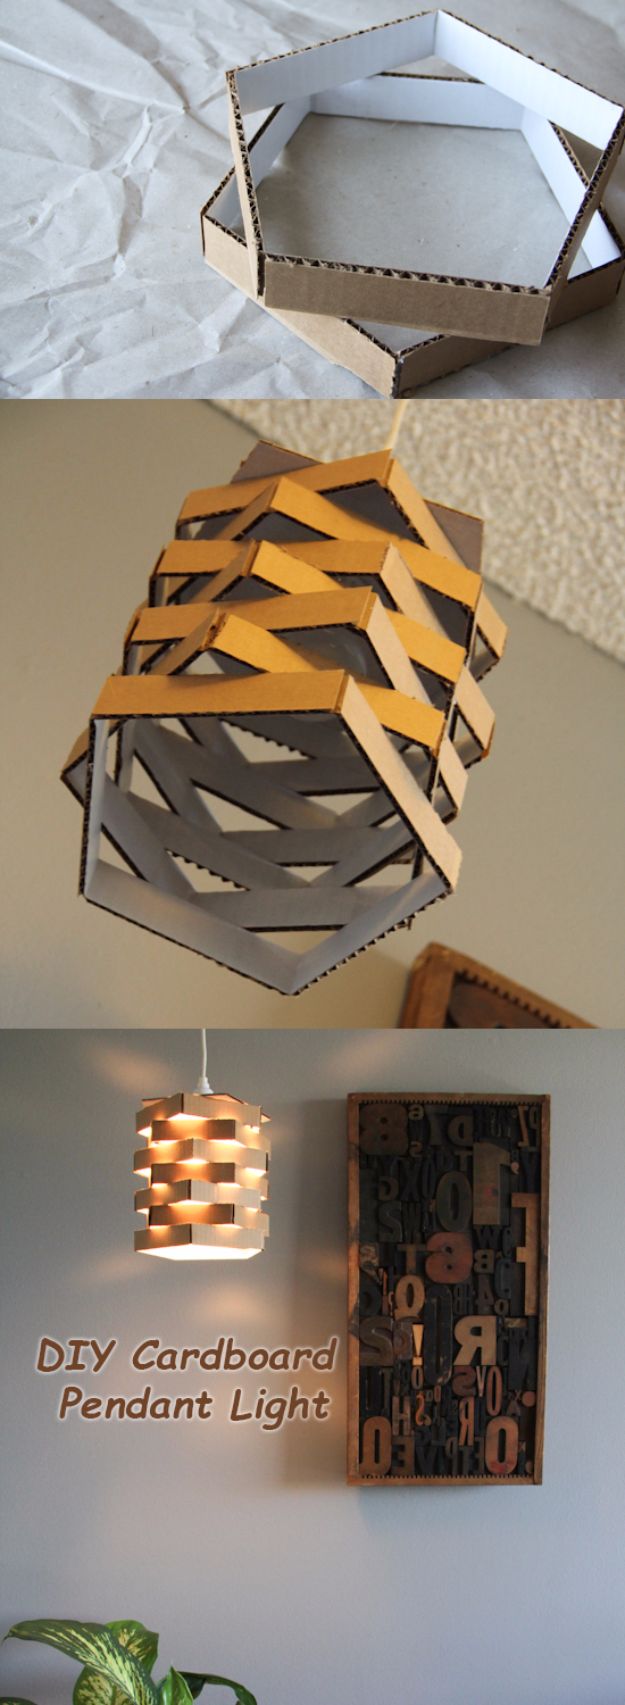 DIY Ideas With Cardboard - DIY Cardboard Pendant Light - How To Make Room Decor Crafts for Kids - Easy and Crafty Storage Ideas For Room - Toilet Paper Roll Projects Tutorials - Fun Furniture Ideas with Cardboard - Cheap, Quick and Easy Wall Decorations #diyideas #cardboardcrafts #crafts